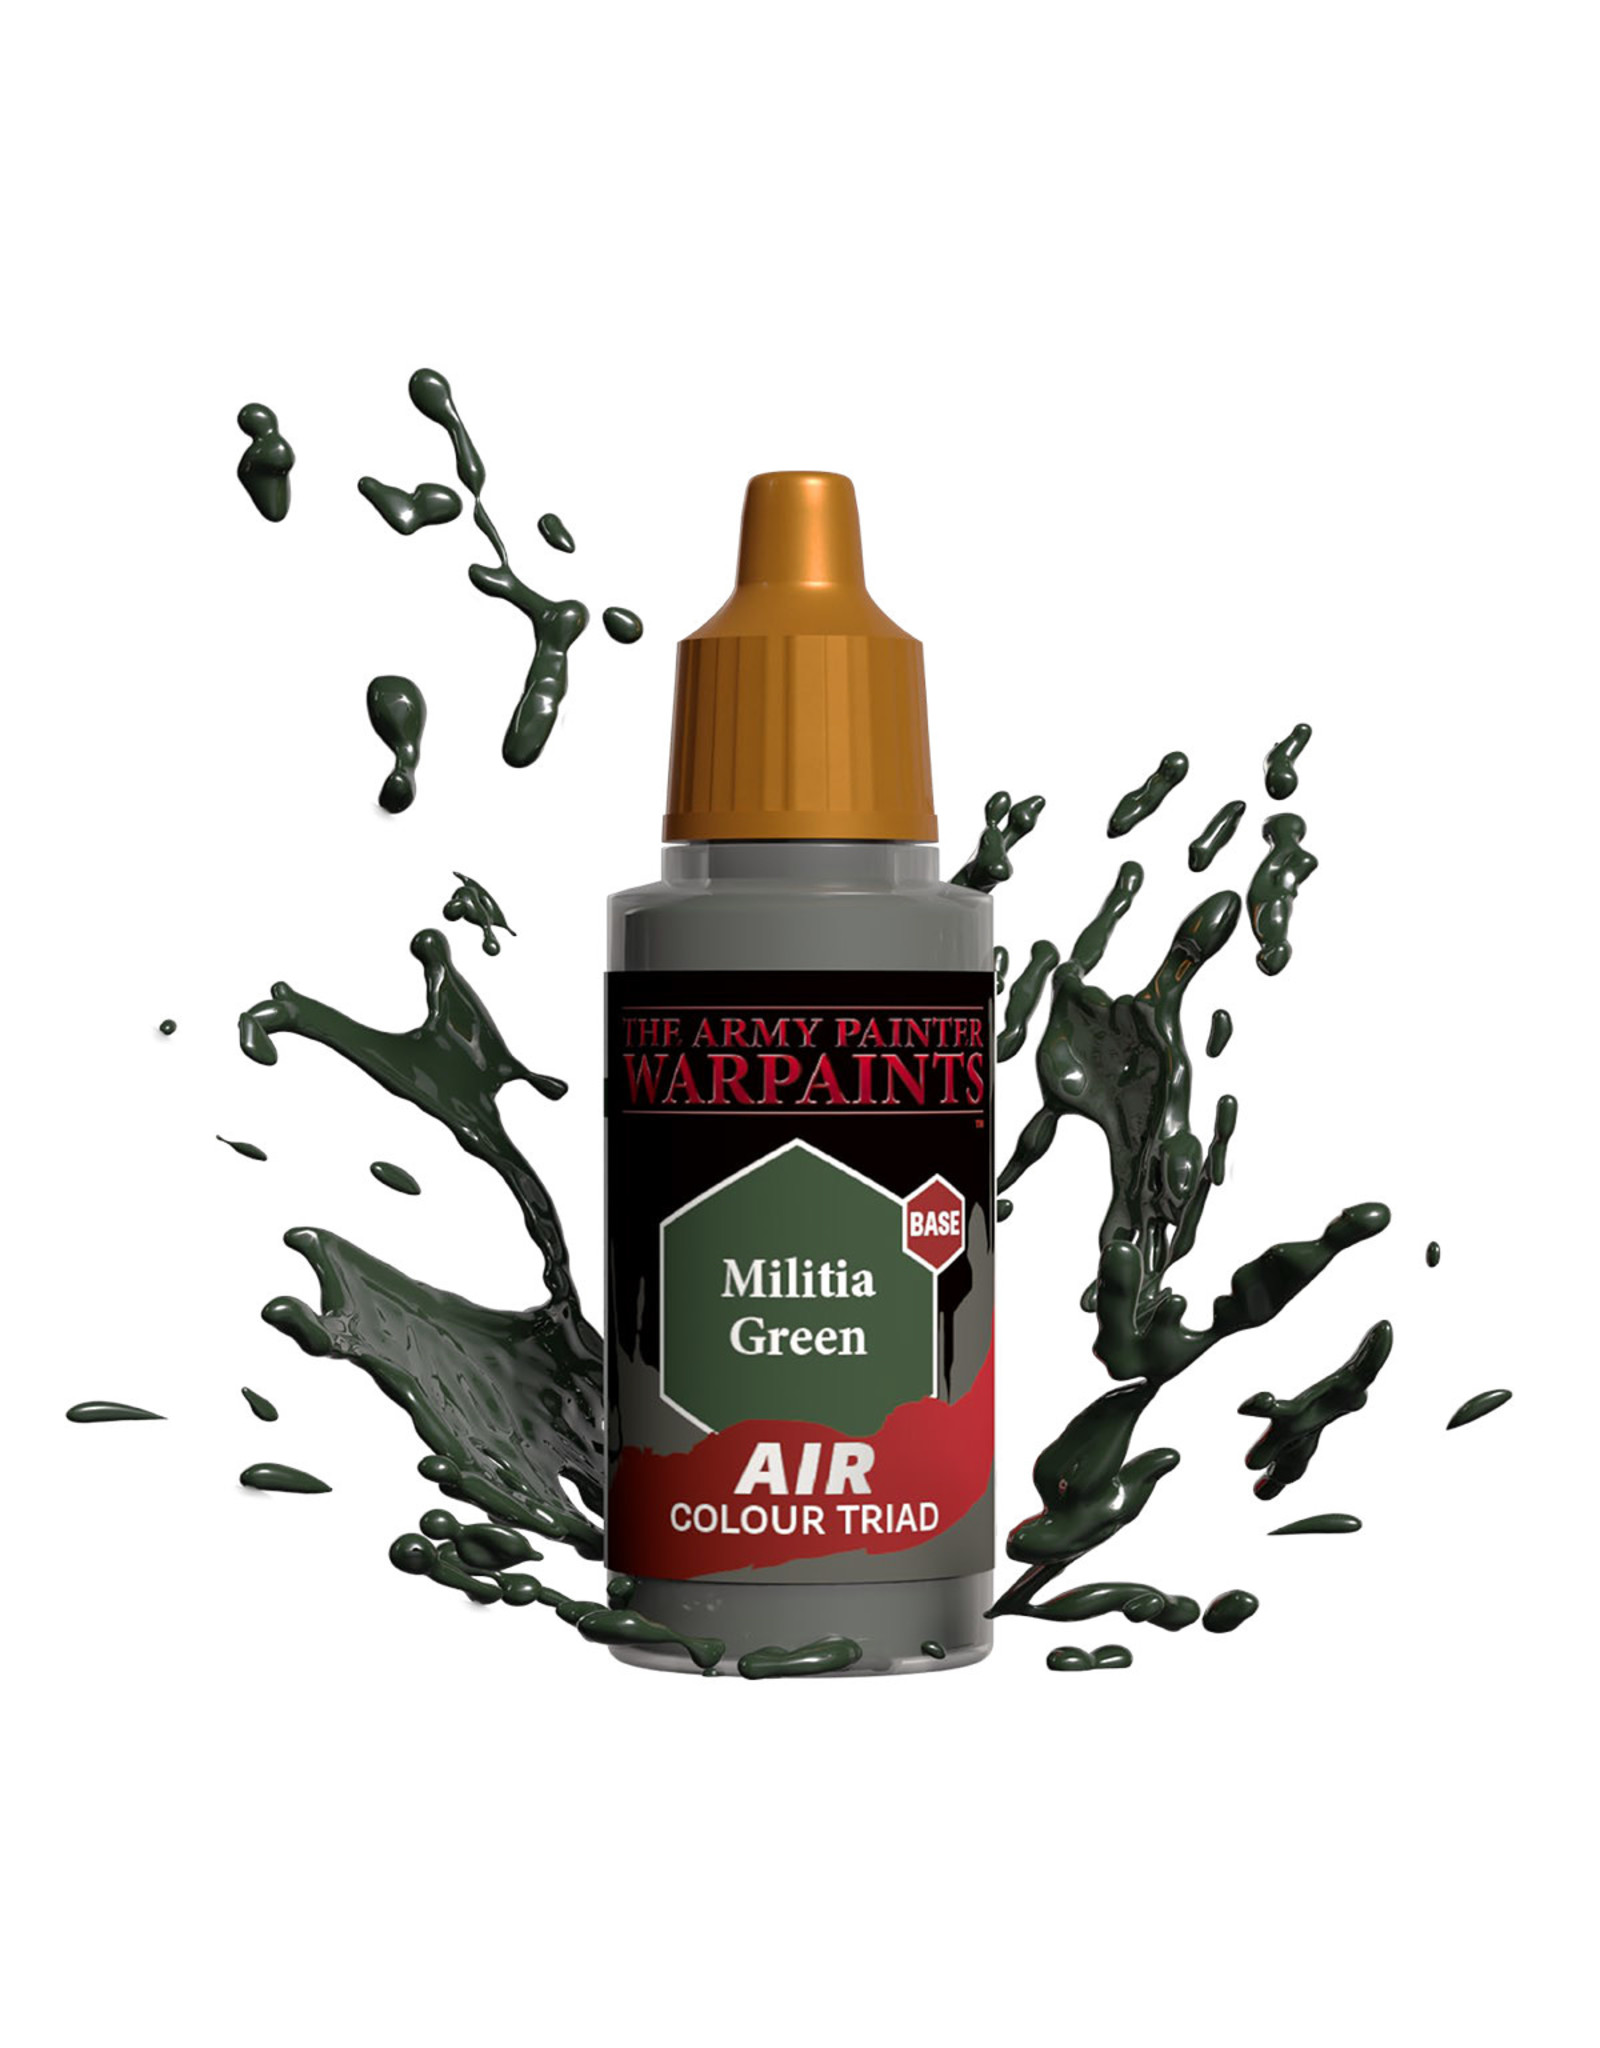 The Army Painter The Army Painter Warpaints Air: Militia Green